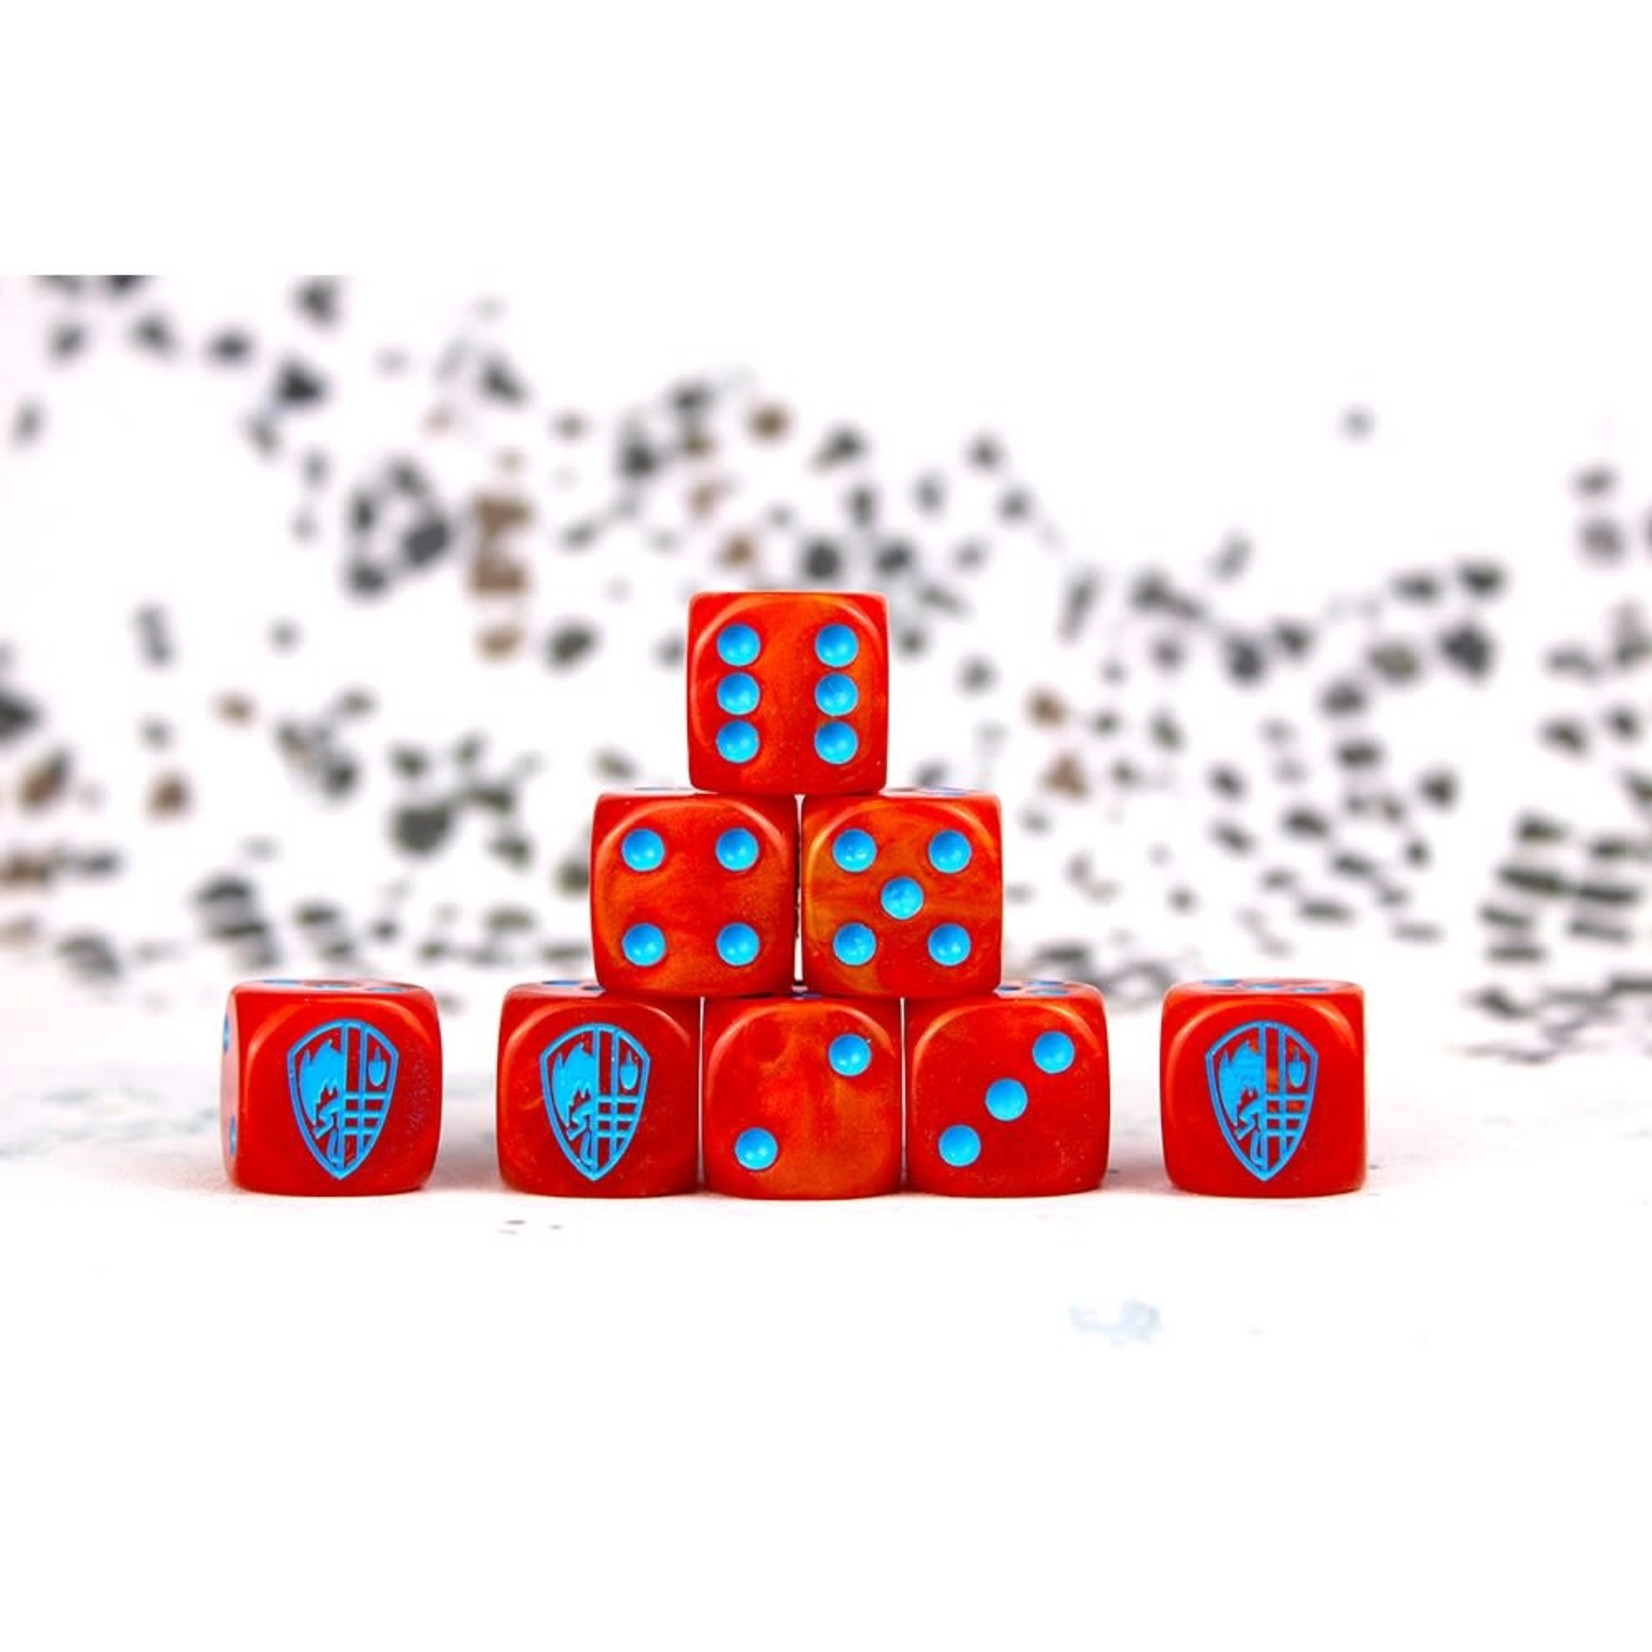 Conquest Hundred Kingdom Faction Dice on Red swirl Dice